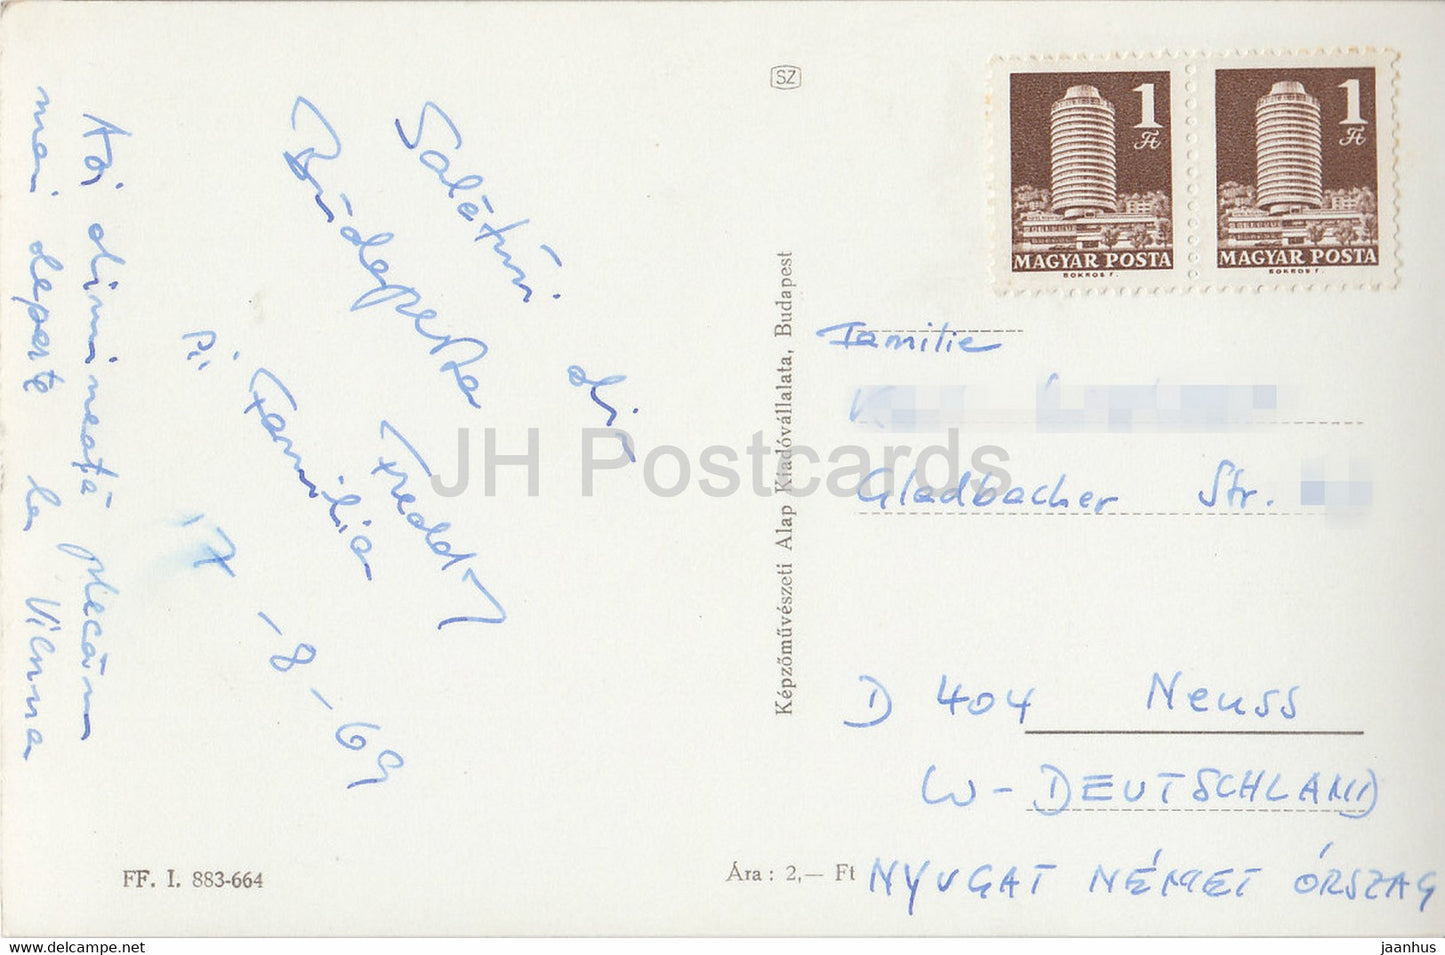 Budapest - car - city views - multiview - 1969 - Hungary - used